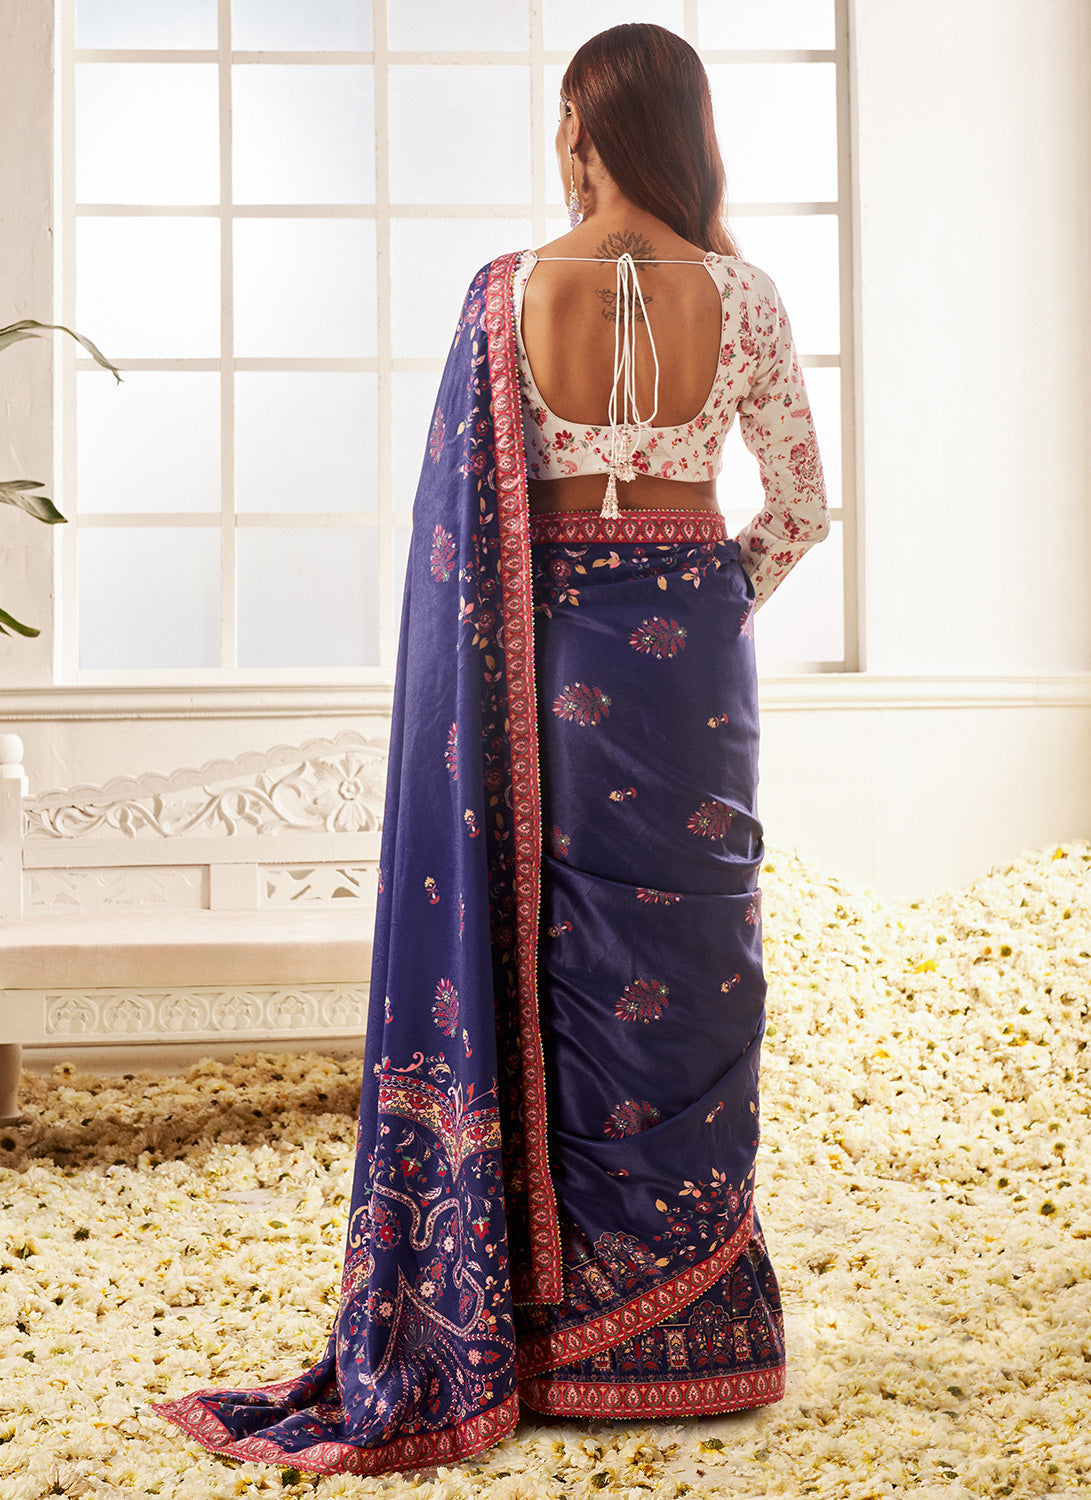 White and Blue Floral Printed Saree